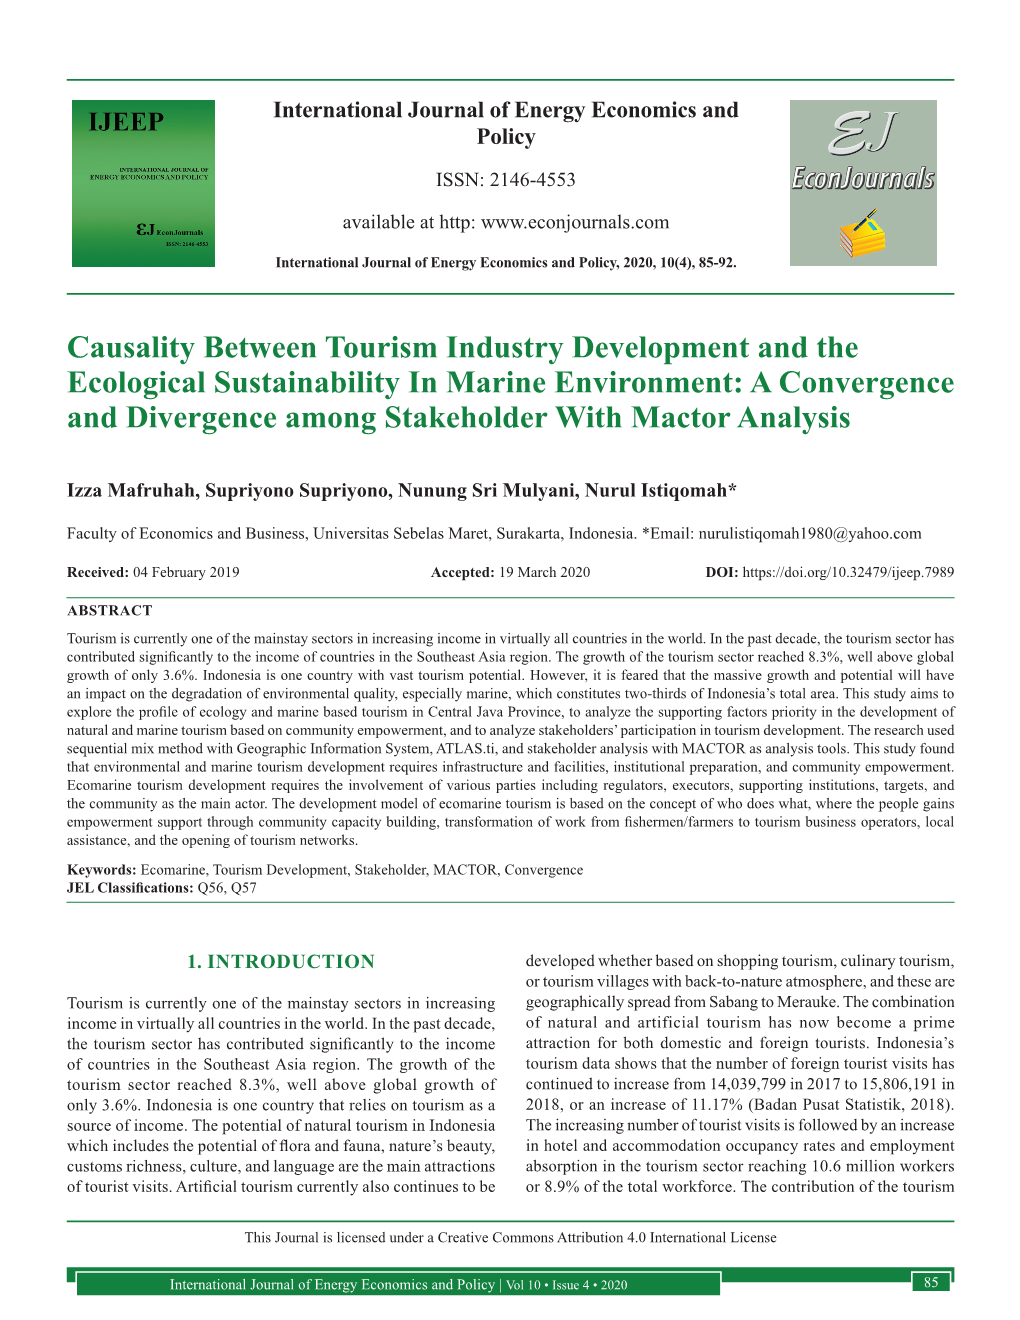 Causality Between Tourism Industry Development and the Ecological